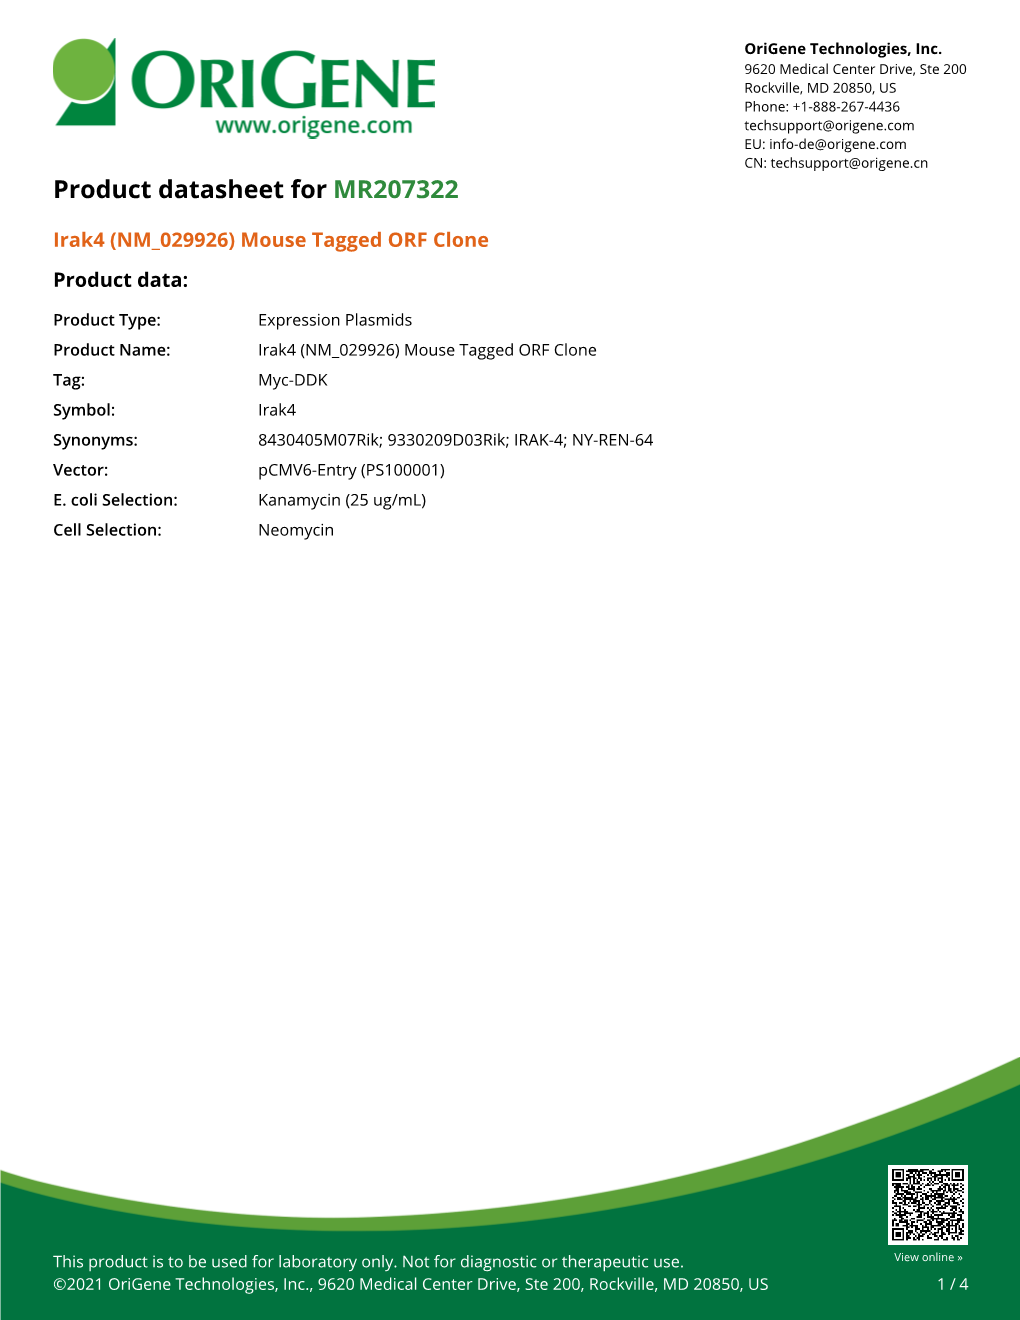 Irak4 (NM 029926) Mouse Tagged ORF Clone Product Data